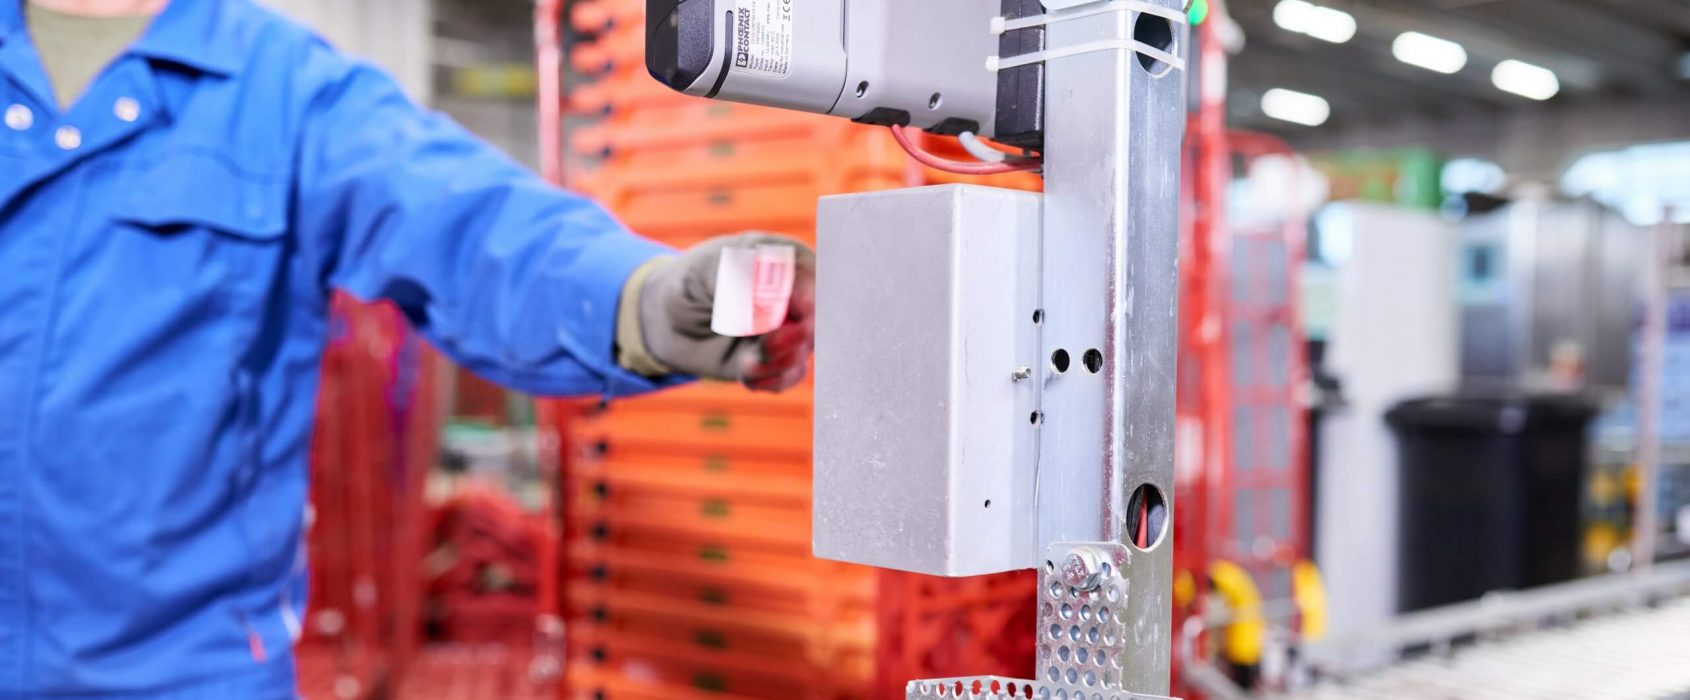 Close-up picture of a Cleanaway employee scanning a ticket at a terminal for booking according to store. This is how empties receiving starts. There are unsorted empties in the background that will soon be placed on the conveyor system.